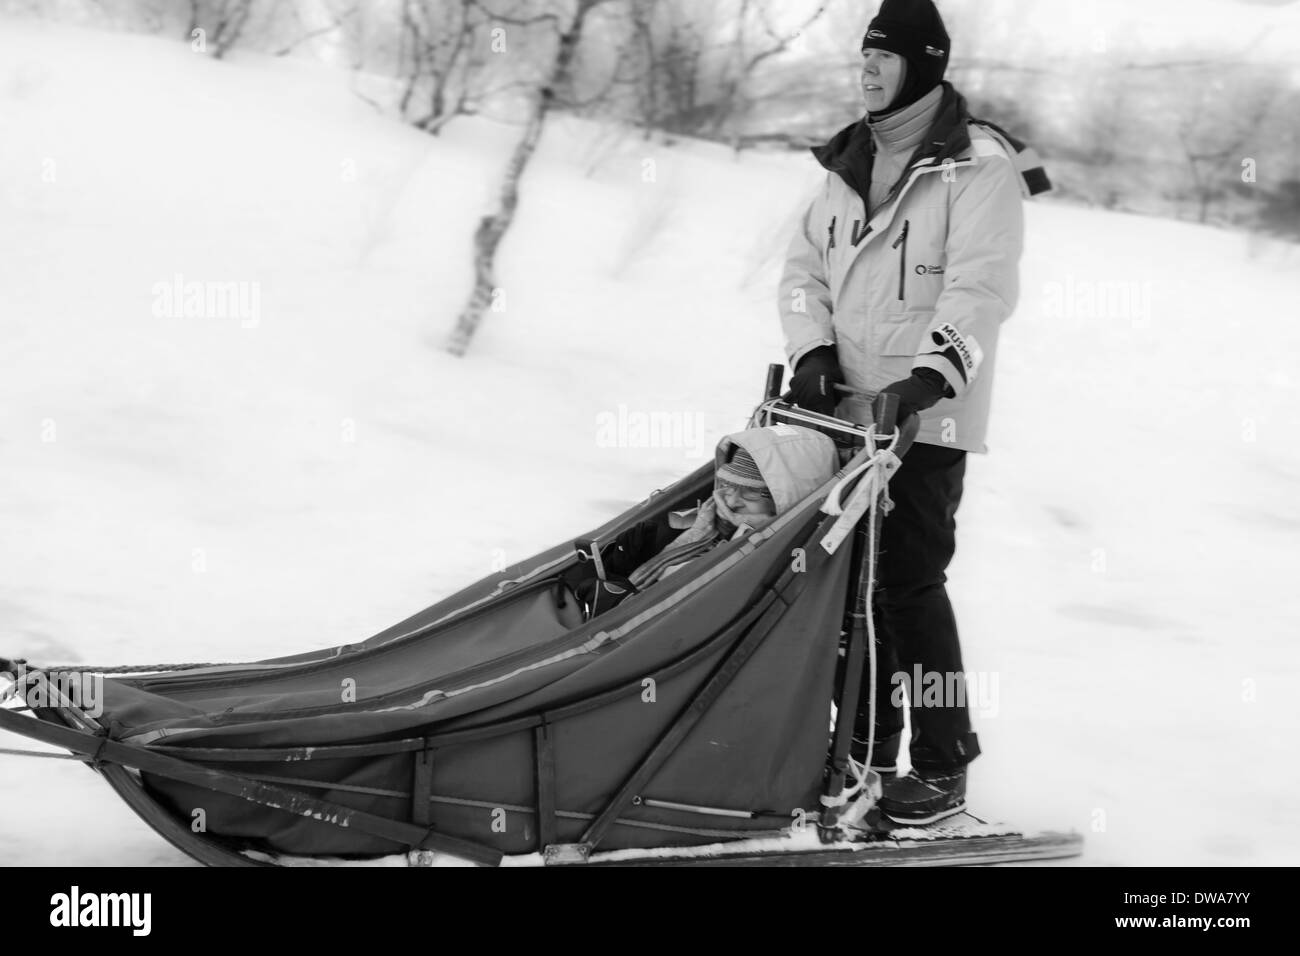 Dog sledding adventure with man driving a sled with a woman inside, Tromso, Norway Stock Photo